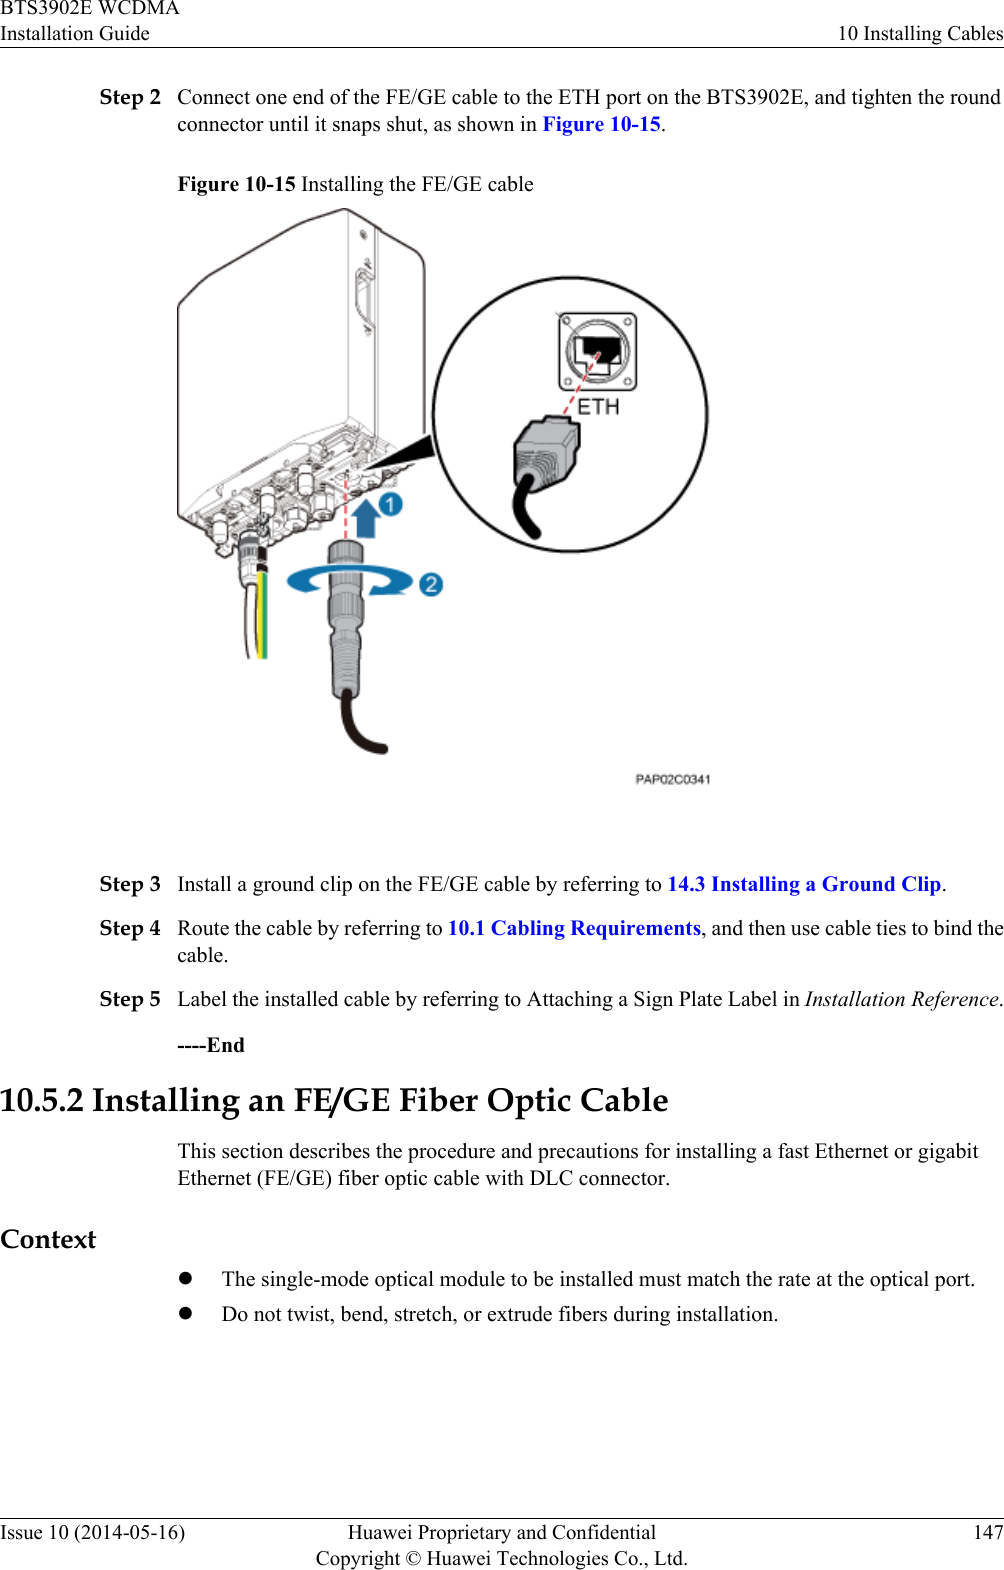 Step 2 Connect one end of the FE/GE cable to the ETH port on the BTS3902E, and tighten the roundconnector until it snaps shut, as shown in Figure 10-15.Figure 10-15 Installing the FE/GE cable Step 3 Install a ground clip on the FE/GE cable by referring to 14.3 Installing a Ground Clip.Step 4 Route the cable by referring to 10.1 Cabling Requirements, and then use cable ties to bind thecable.Step 5 Label the installed cable by referring to Attaching a Sign Plate Label in Installation Reference.----End10.5.2 Installing an FE/GE Fiber Optic CableThis section describes the procedure and precautions for installing a fast Ethernet or gigabitEthernet (FE/GE) fiber optic cable with DLC connector.ContextlThe single-mode optical module to be installed must match the rate at the optical port.lDo not twist, bend, stretch, or extrude fibers during installation.BTS3902E WCDMAInstallation Guide 10 Installing CablesIssue 10 (2014-05-16) Huawei Proprietary and ConfidentialCopyright © Huawei Technologies Co., Ltd.147